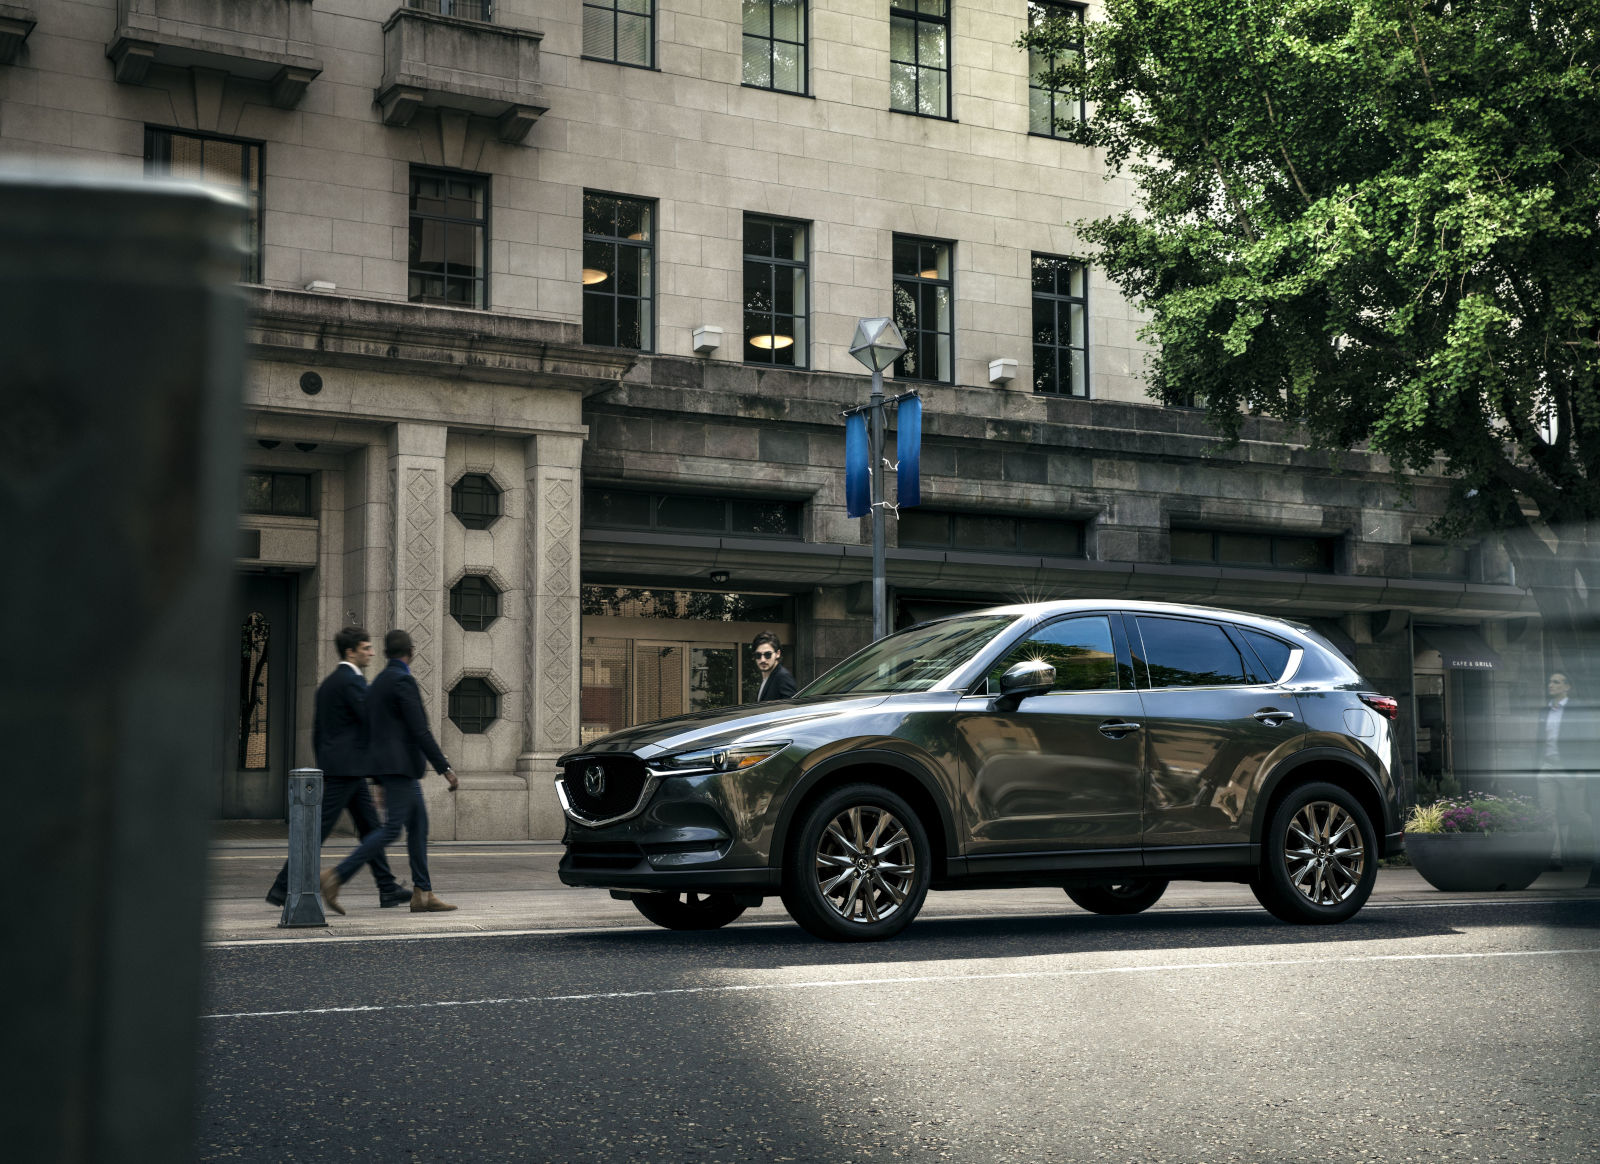 Why consider a pre-owned Mazda CX-5?